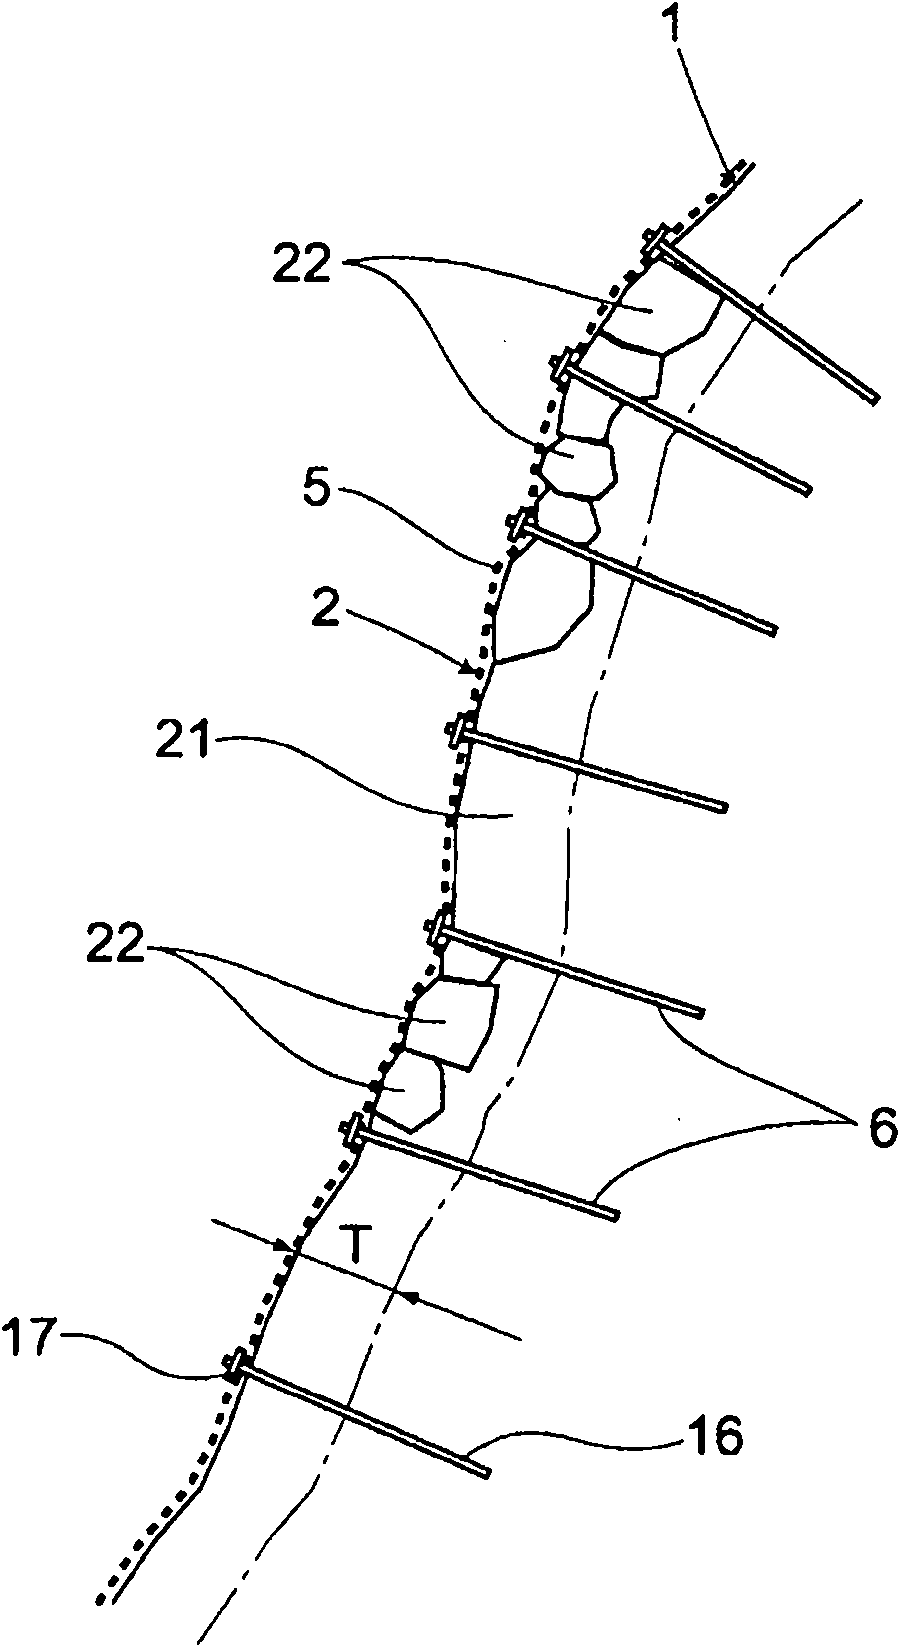 A structure for preventing rockfall, a rockfall prevention method, and a method for designing said structure